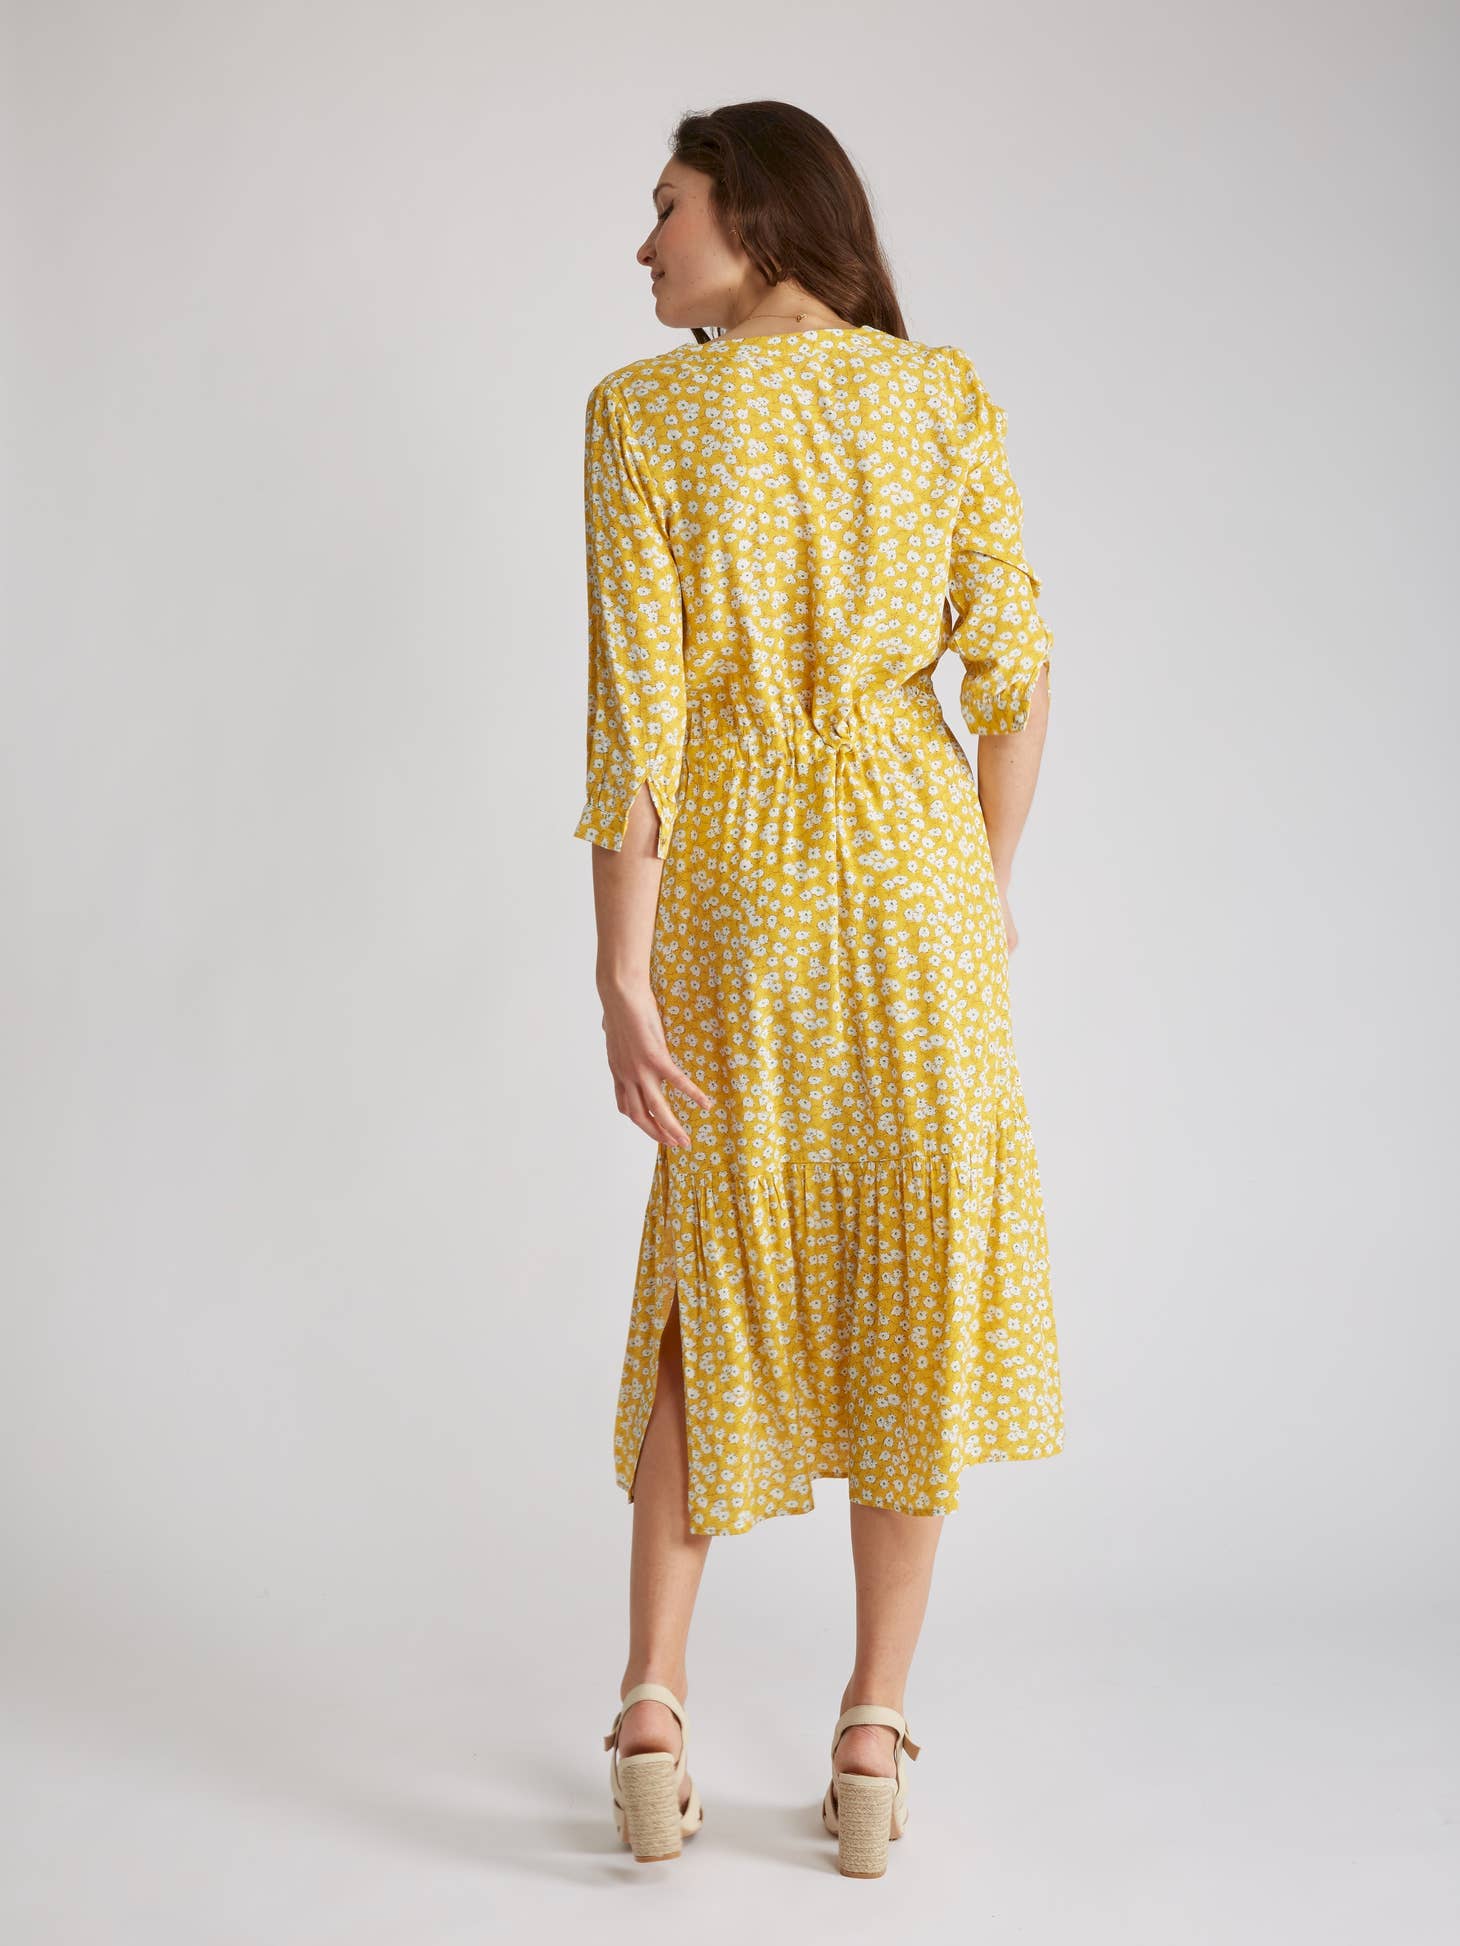 yellow floral print midi dress with small side slit and tie waist